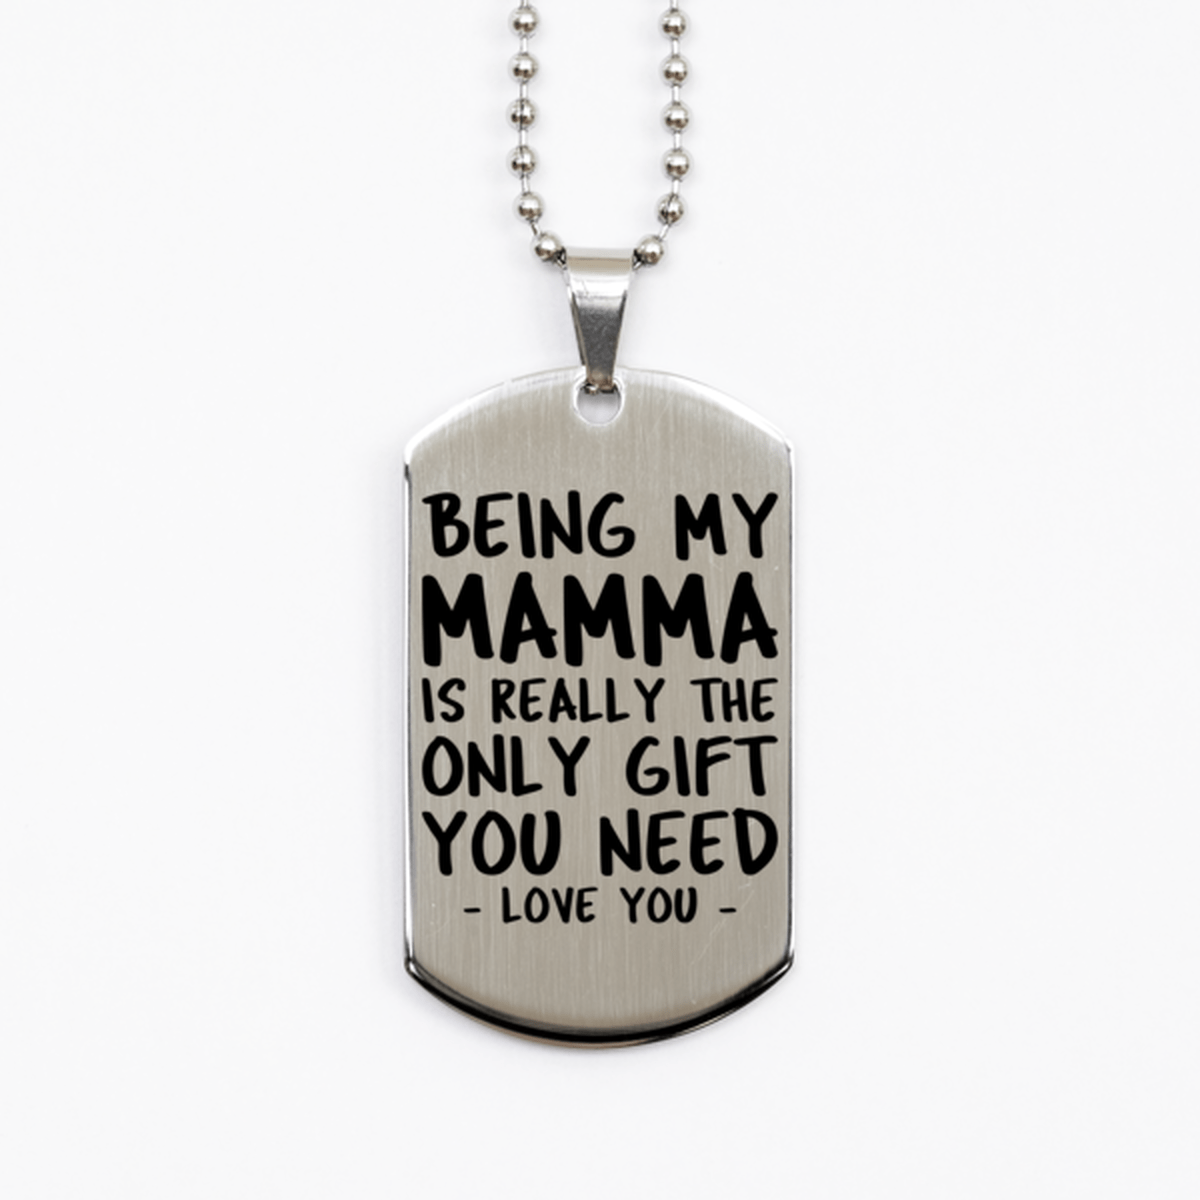 Funny Mamma Silver Dog Tag Necklace, Being My Mamma Is Really the Only Gift You Need, Best Birthday Gifts for Mamma